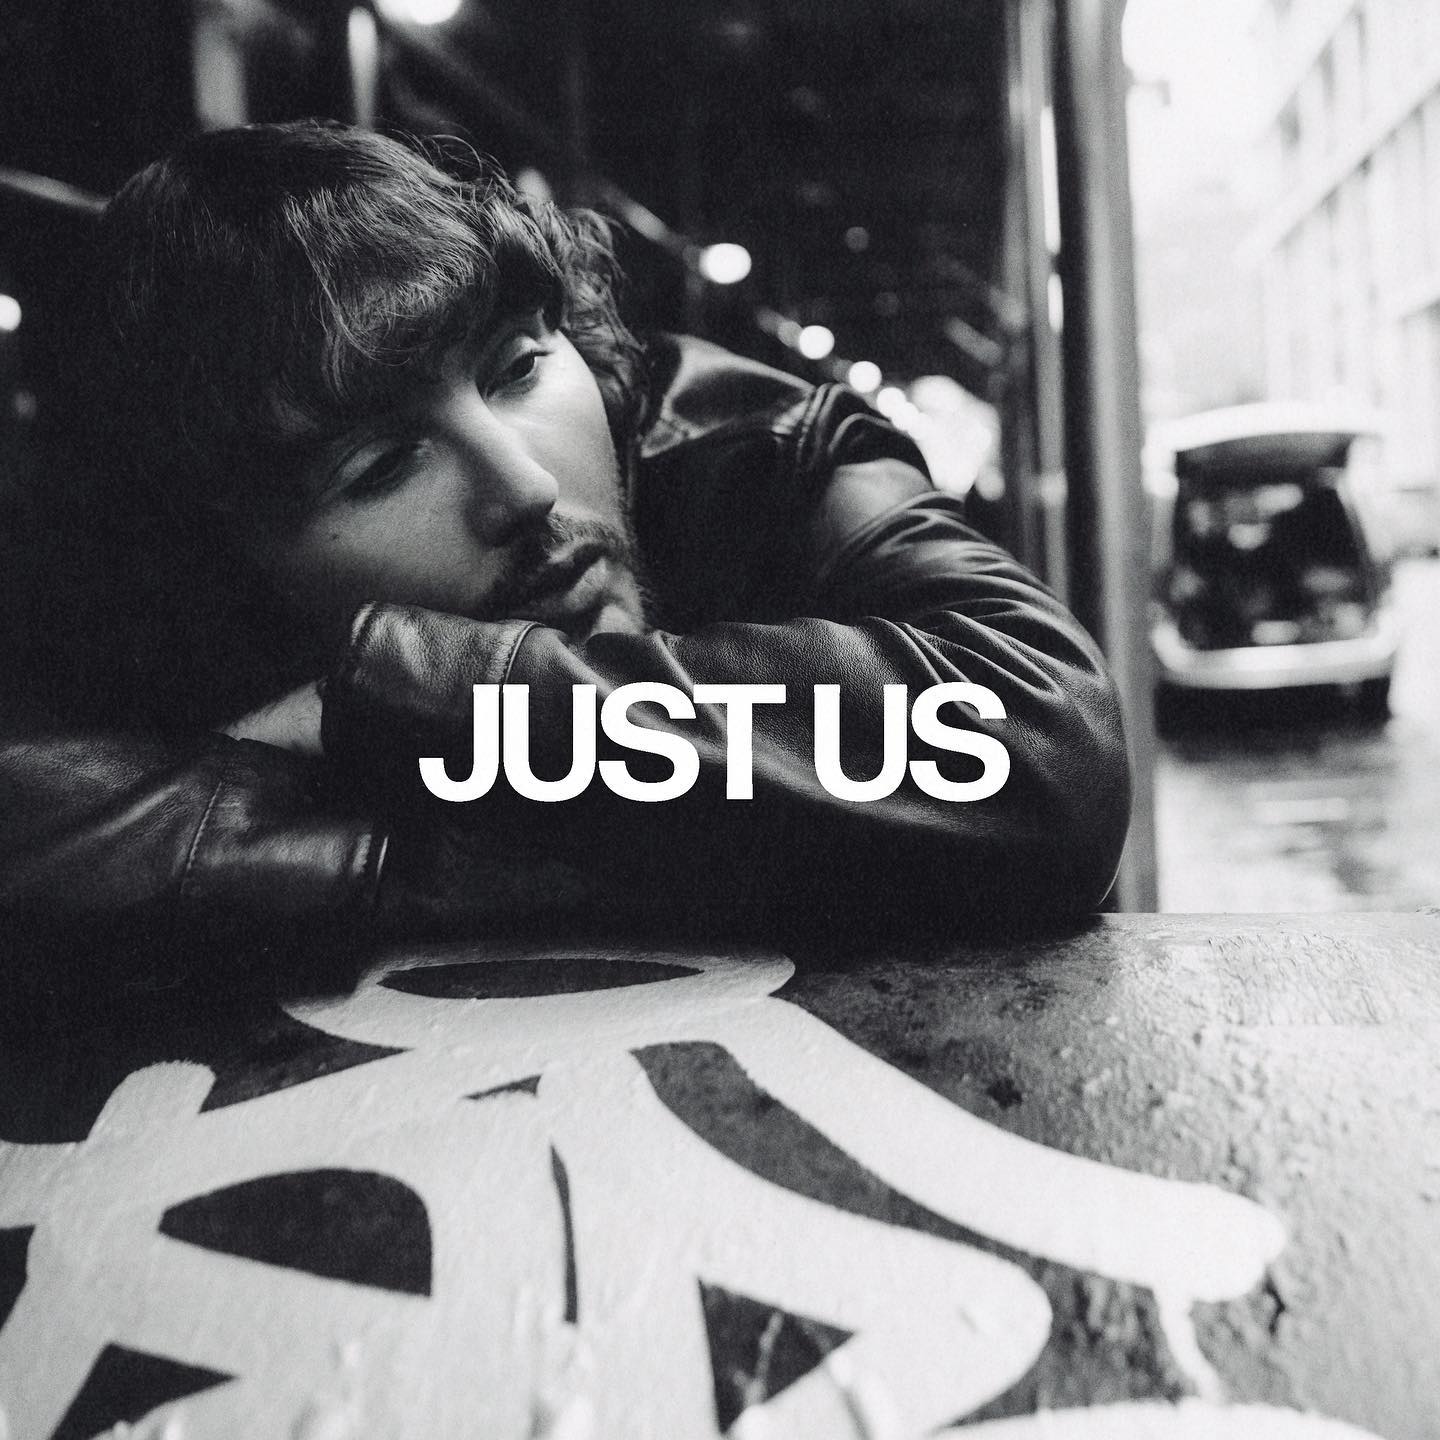 Cover - Just us